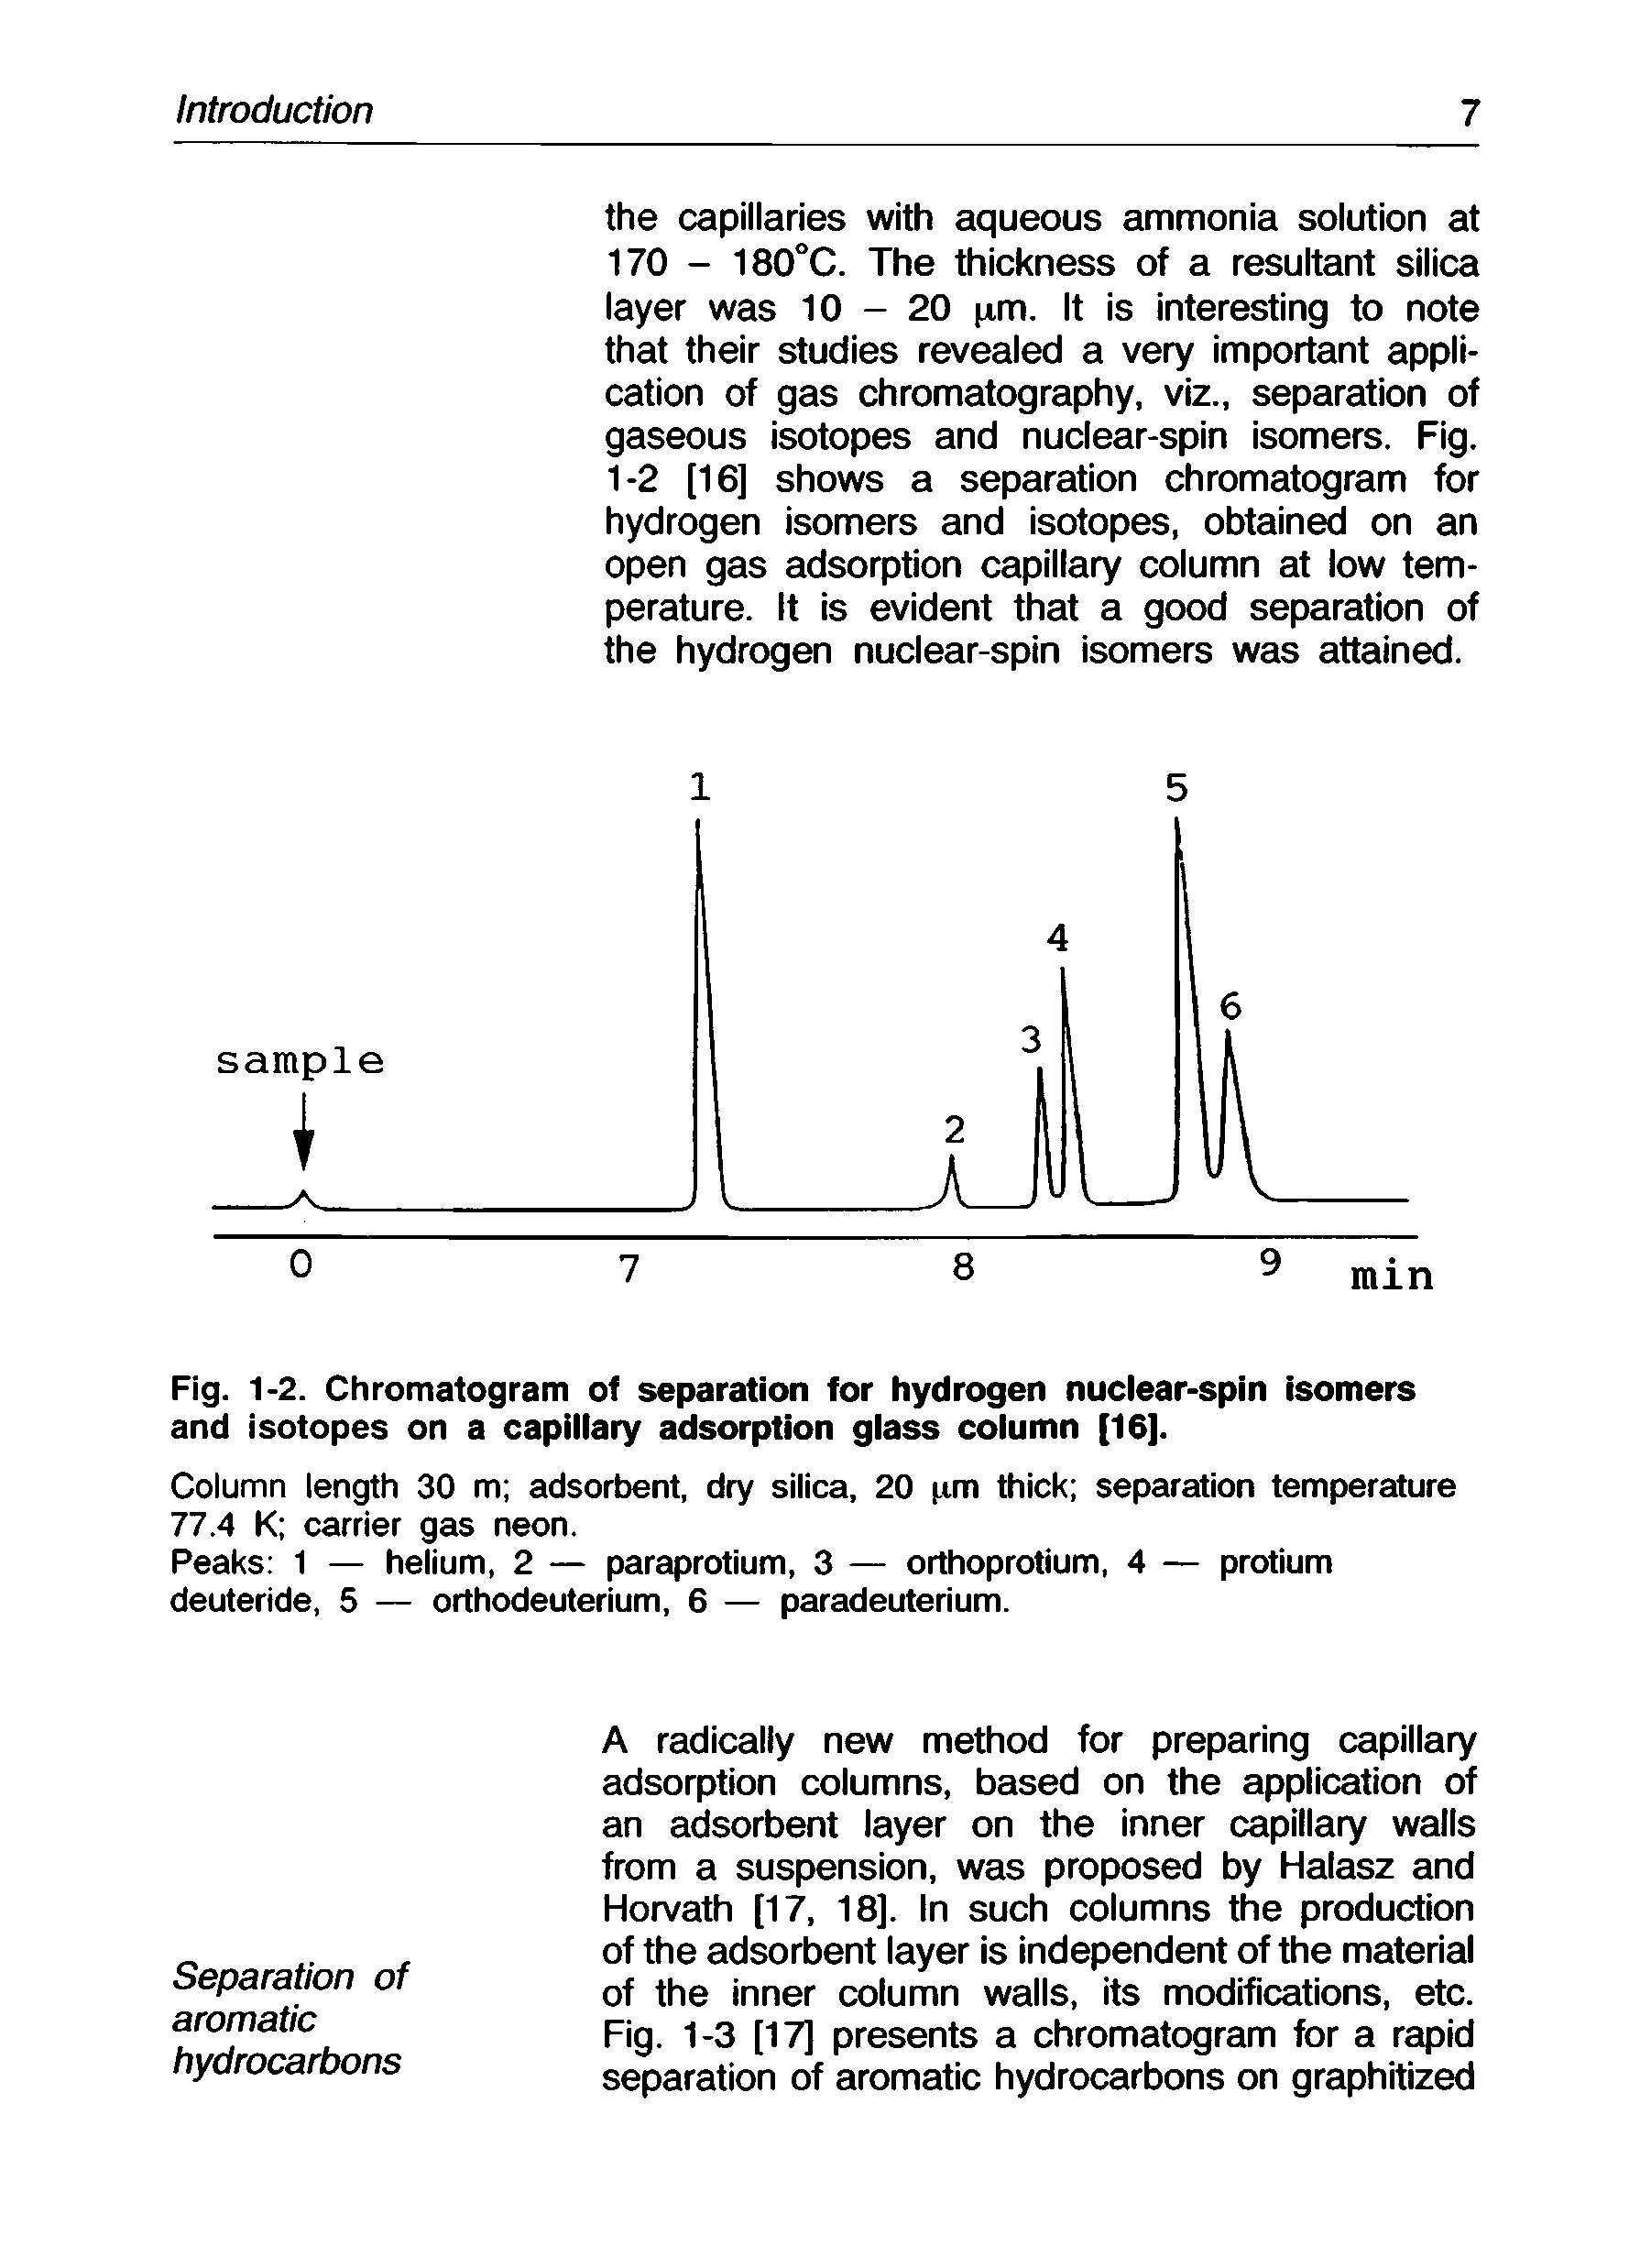 Fig. 1-2. Chromatogram of separation for hydrogen nuclear-spin isomers and isotopes on a capillary adsorption glass column [16].